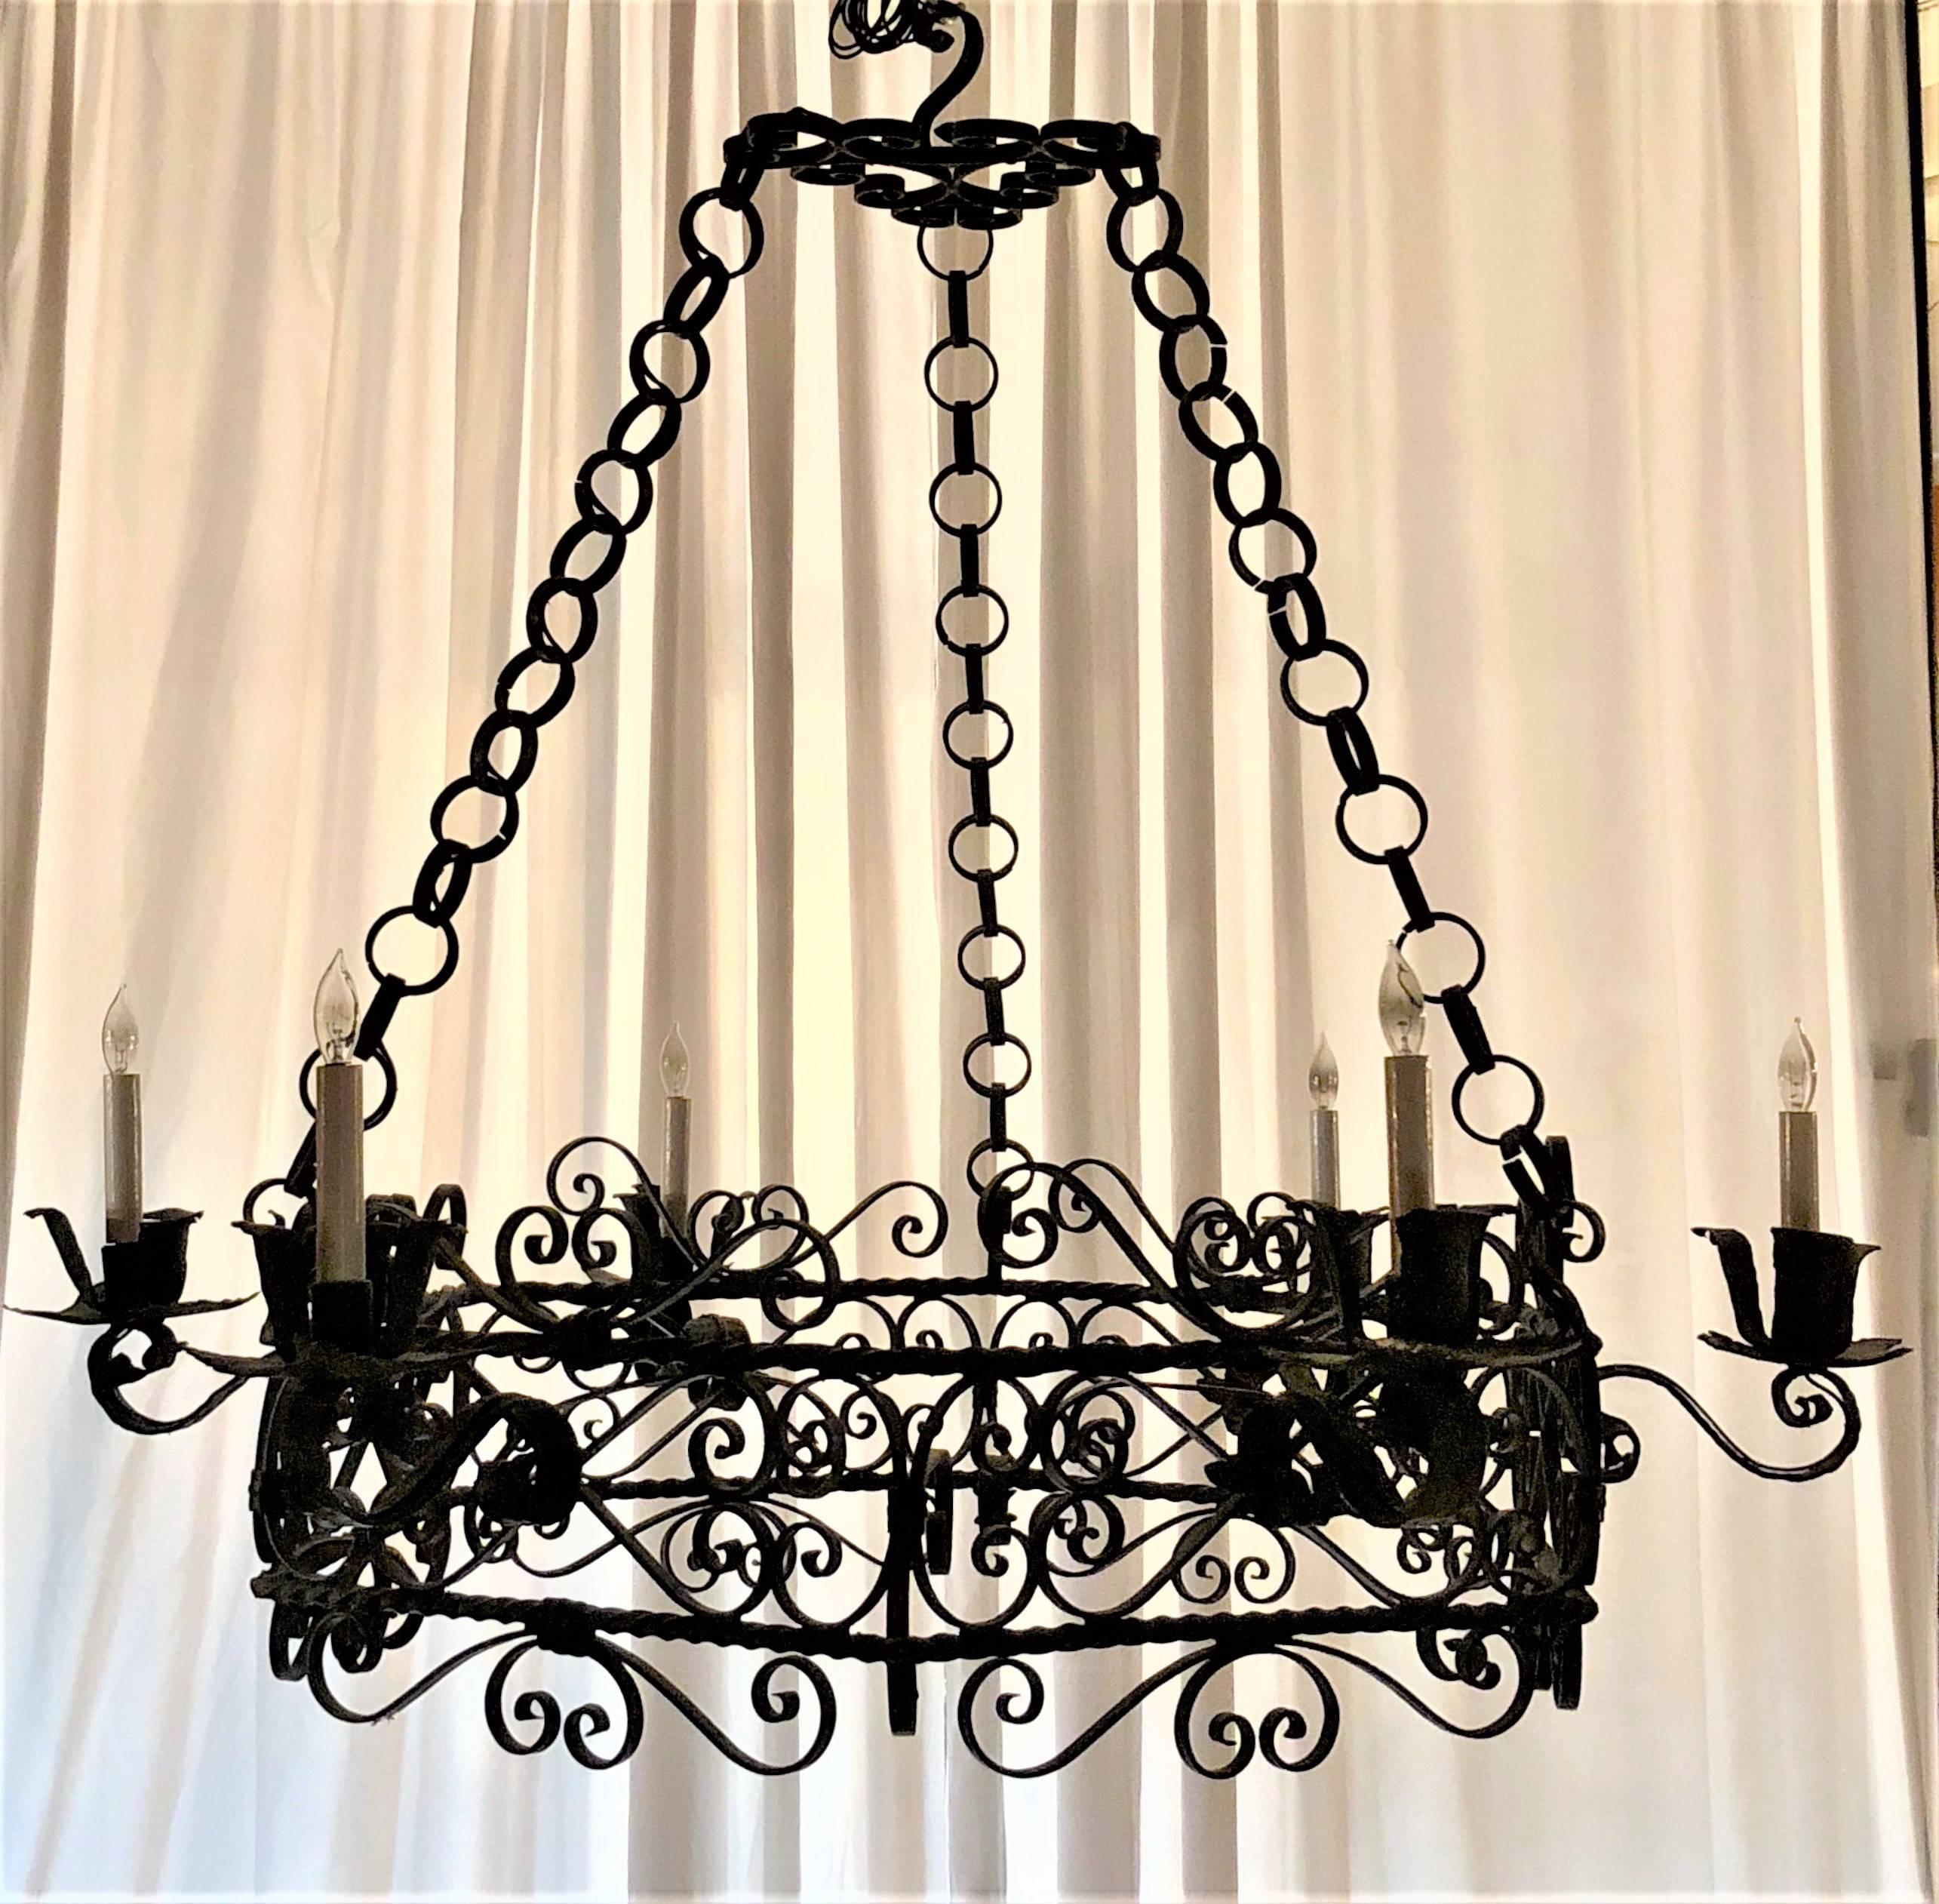 This fixture has very nice detail in the ironwork.
 